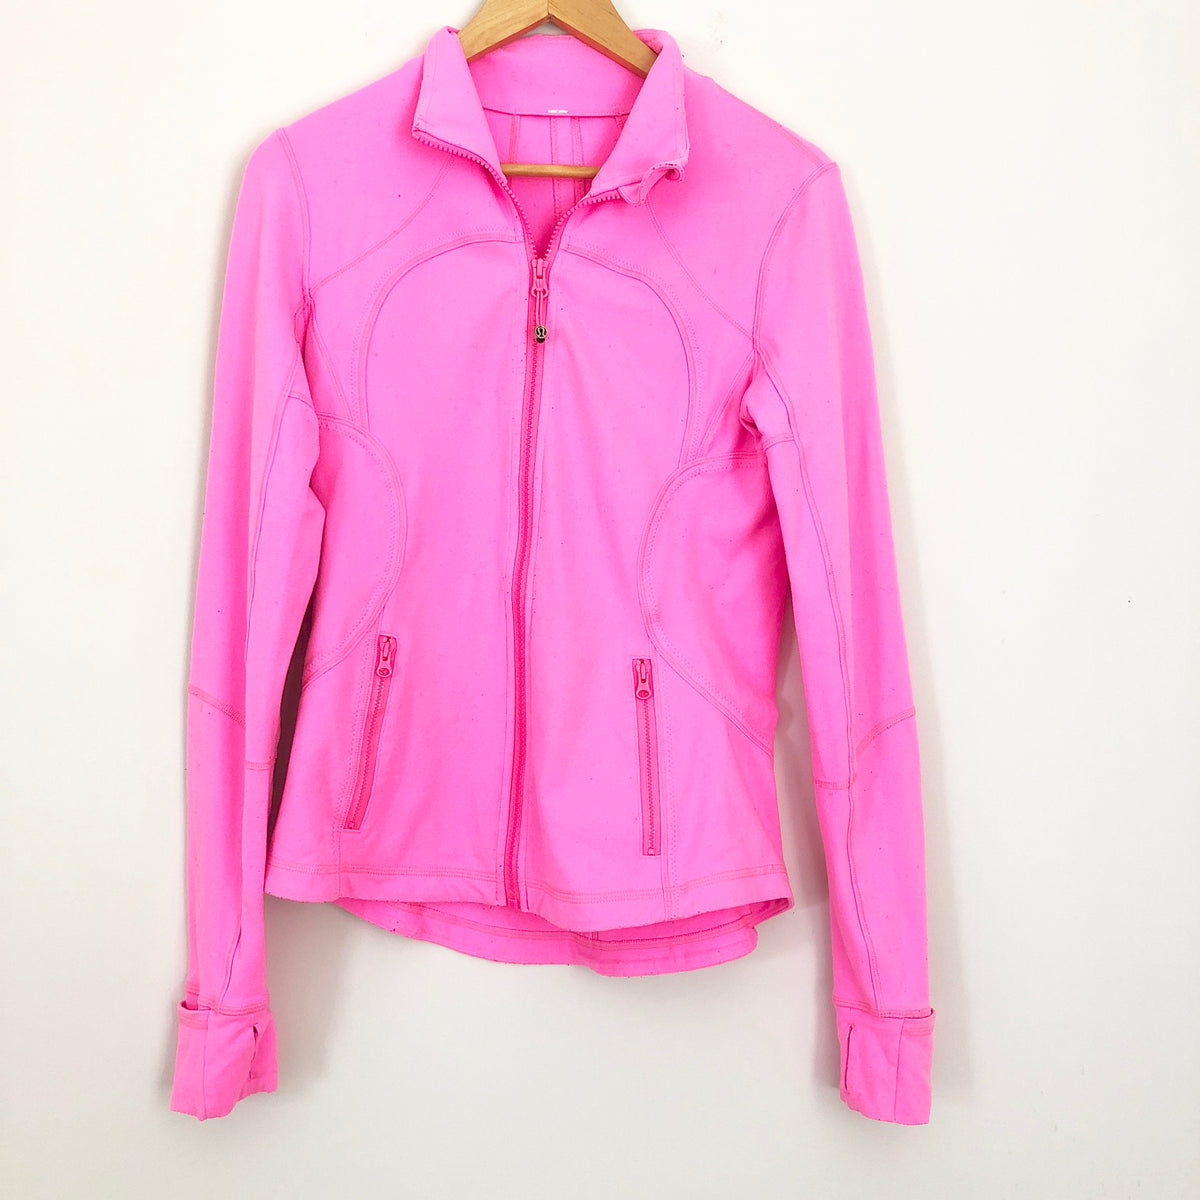 Lululemon Hot Pink Zip Up Jacket with Pockets- Size 8 – The Saved Collection